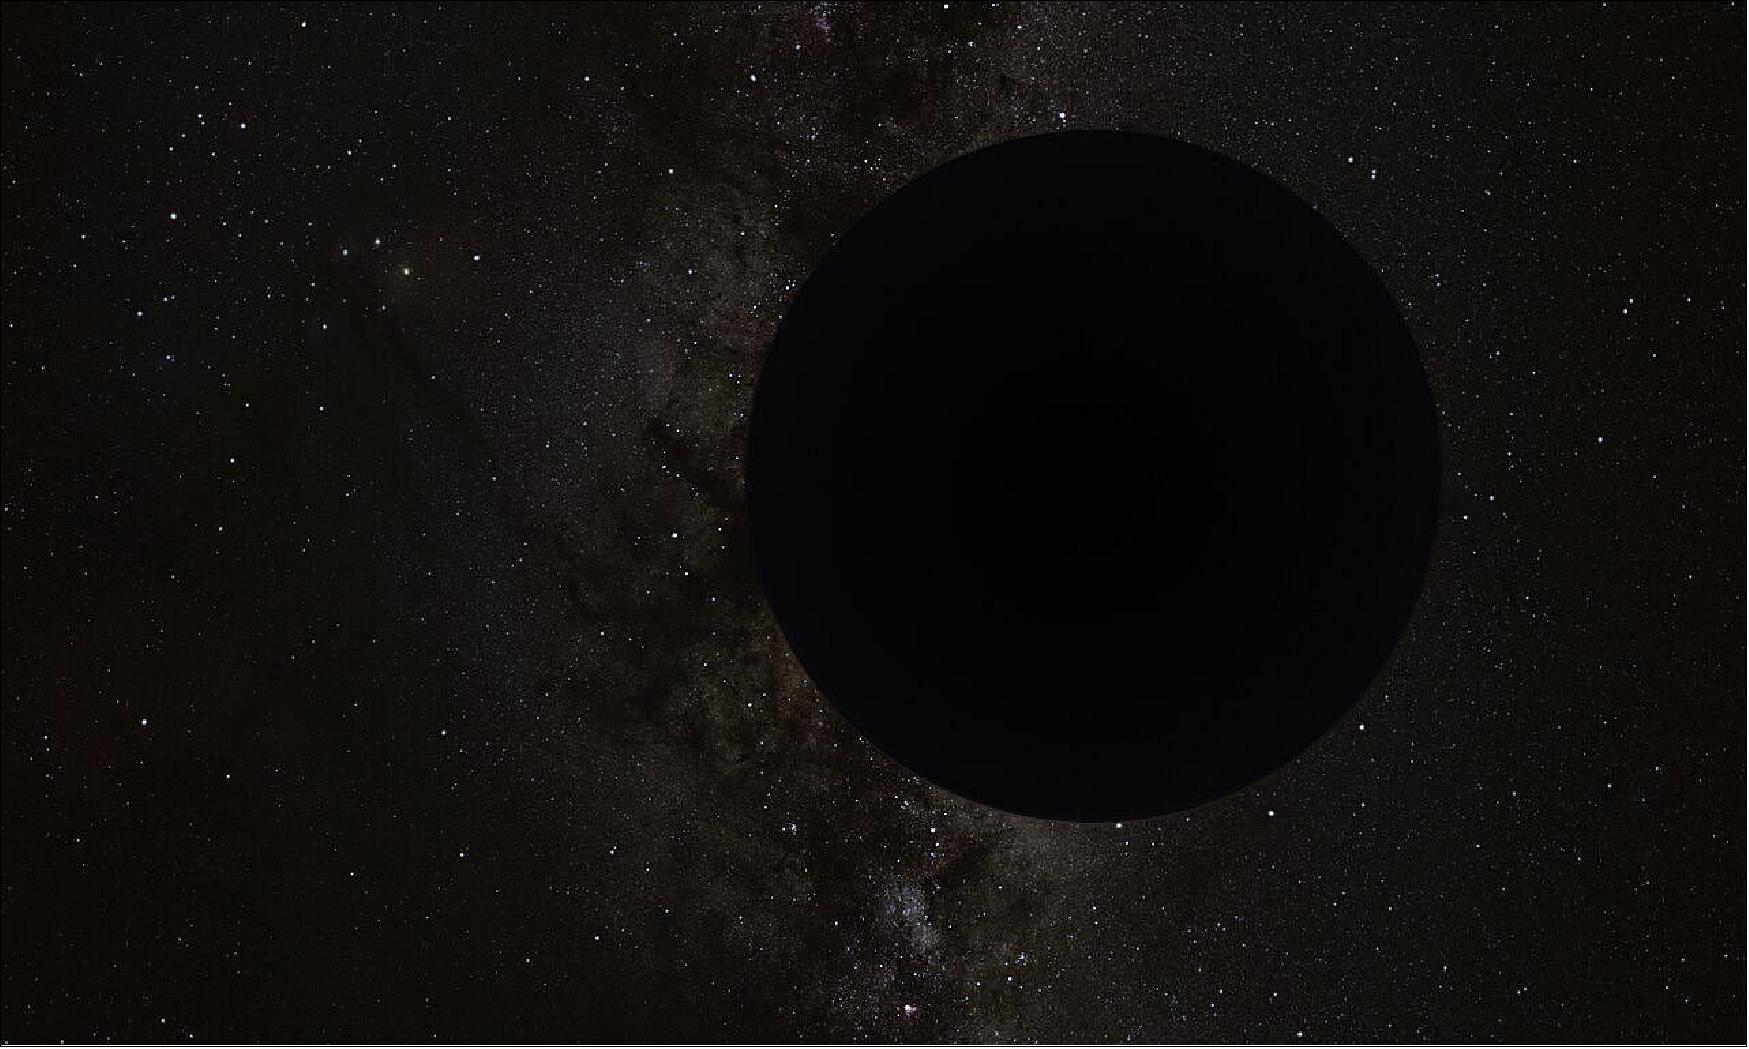 Figure 6: Artist’s Impression of the Hypothesized “Planet Nine”. An 11-Jupiter-mass exoplanet called HD106906 b occupies an unlikely orbit around a double star 336 light-years away and may be offering clues to something that might be much closer to home: a hypothesized distant member of our Solar System dubbed “Planet Nine.” This is the first time that astronomers have been able to measure the motion of a massive Jupiter-like planet that is orbiting very far away from its host stars and visible debris disc (image credit: ESA/Hubble, M. Kornmesser)